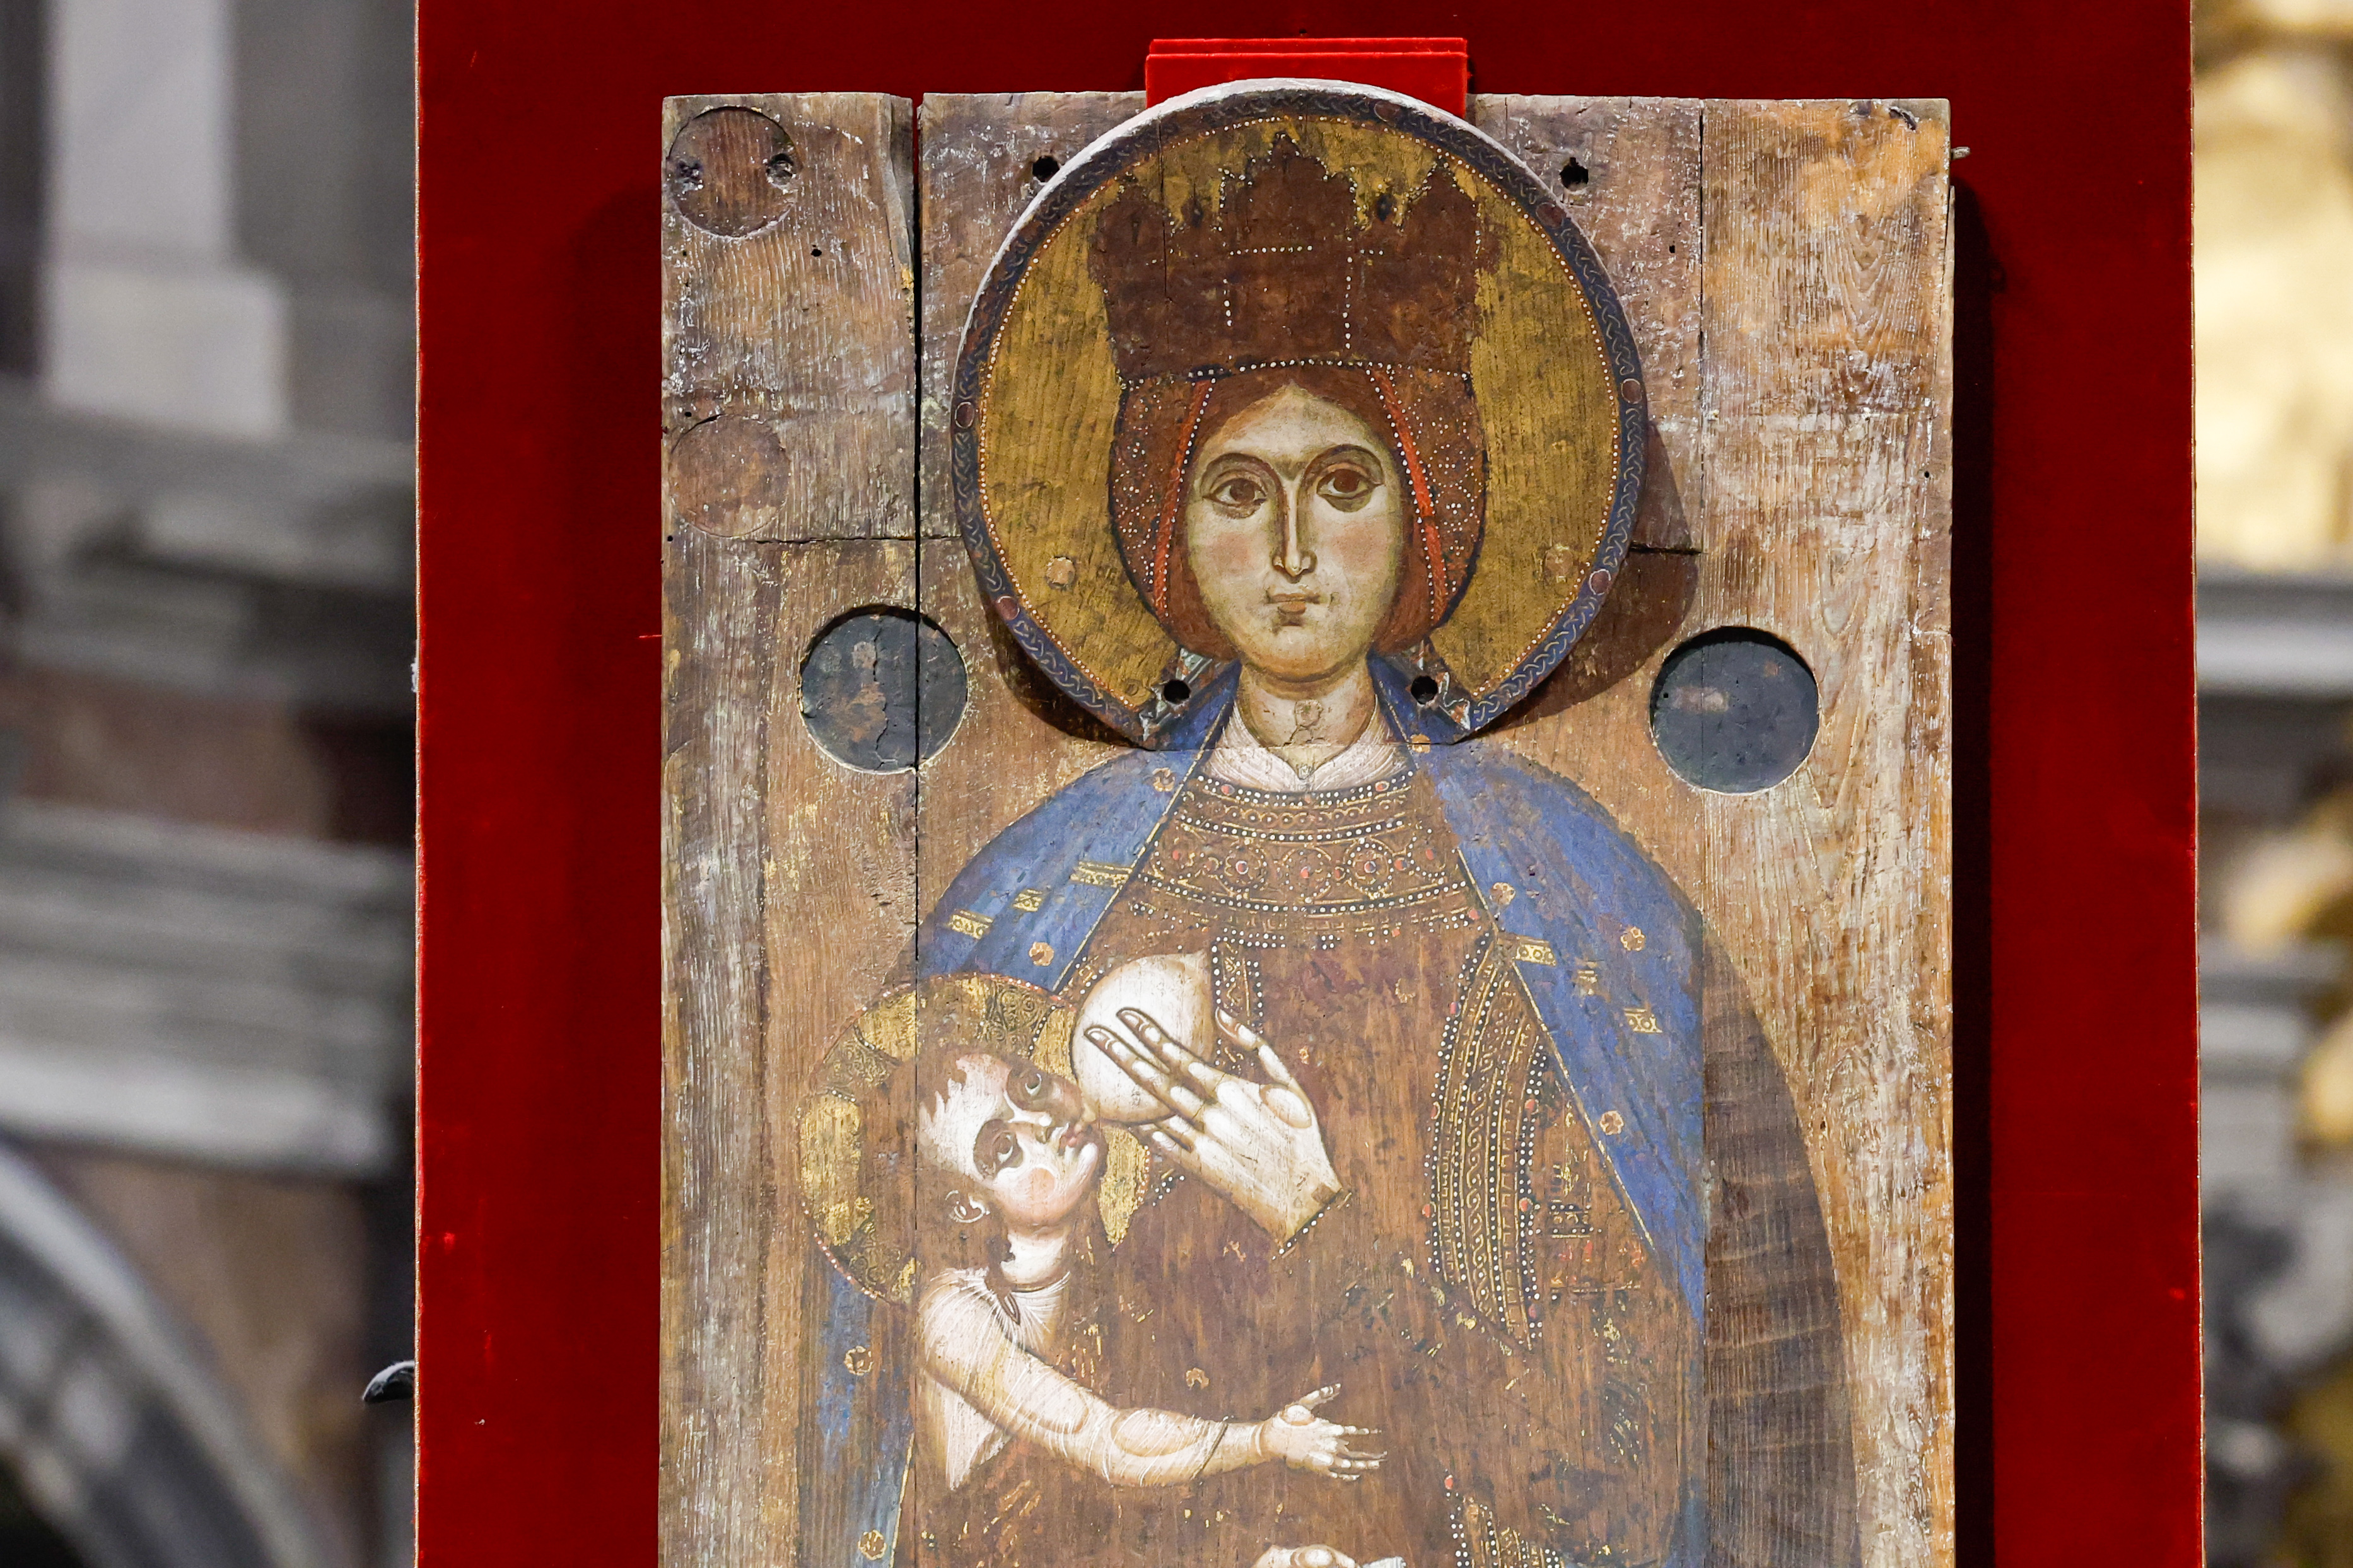 An icon of the "Madonna Lactans" or Nursing Madonna.